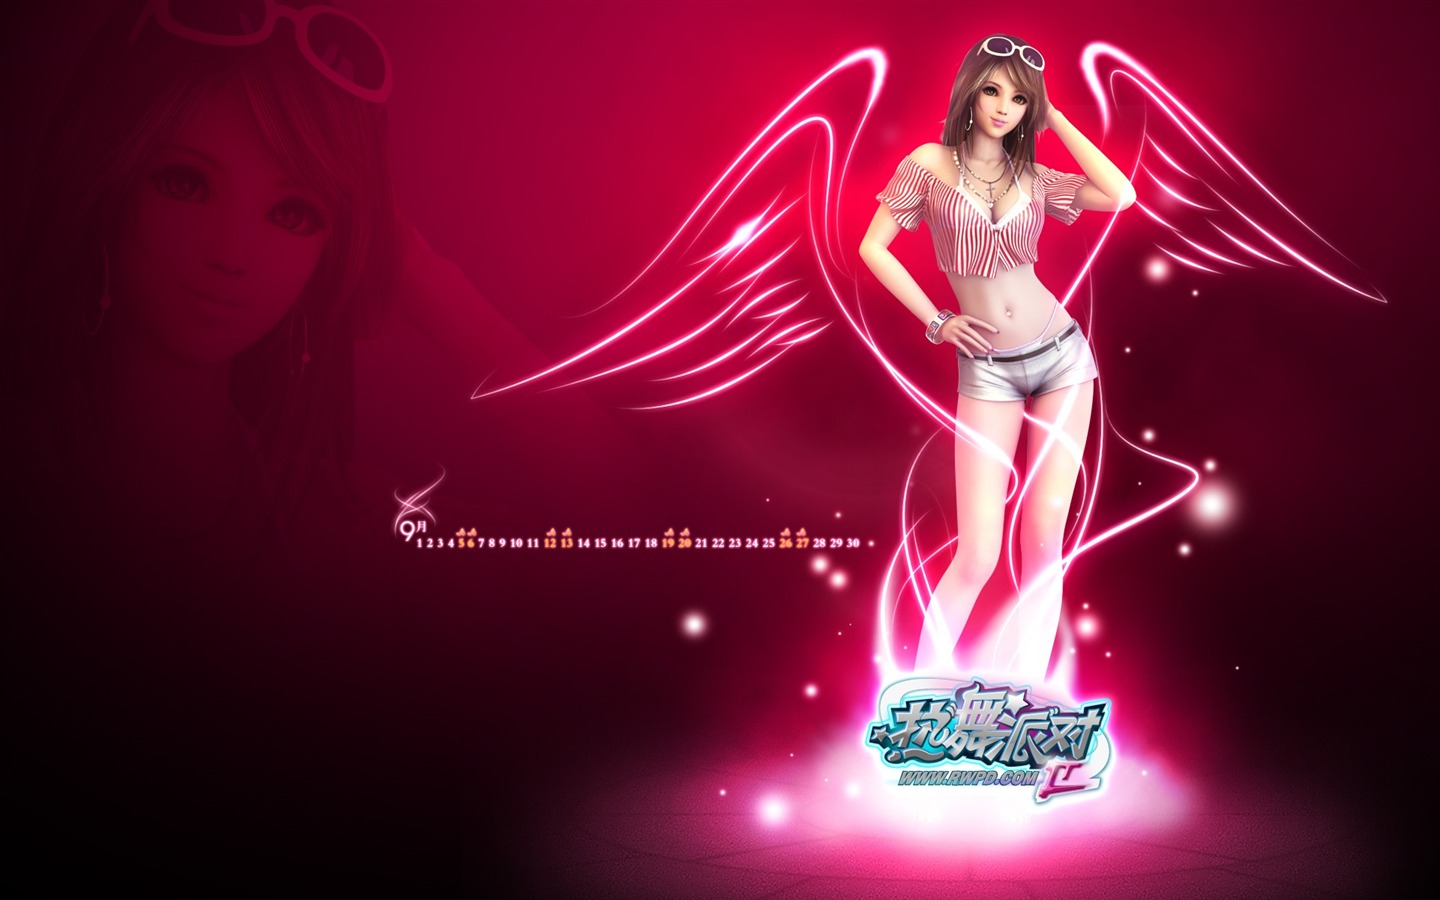 Online game Hot Dance Party II official wallpapers #2 - 1440x900